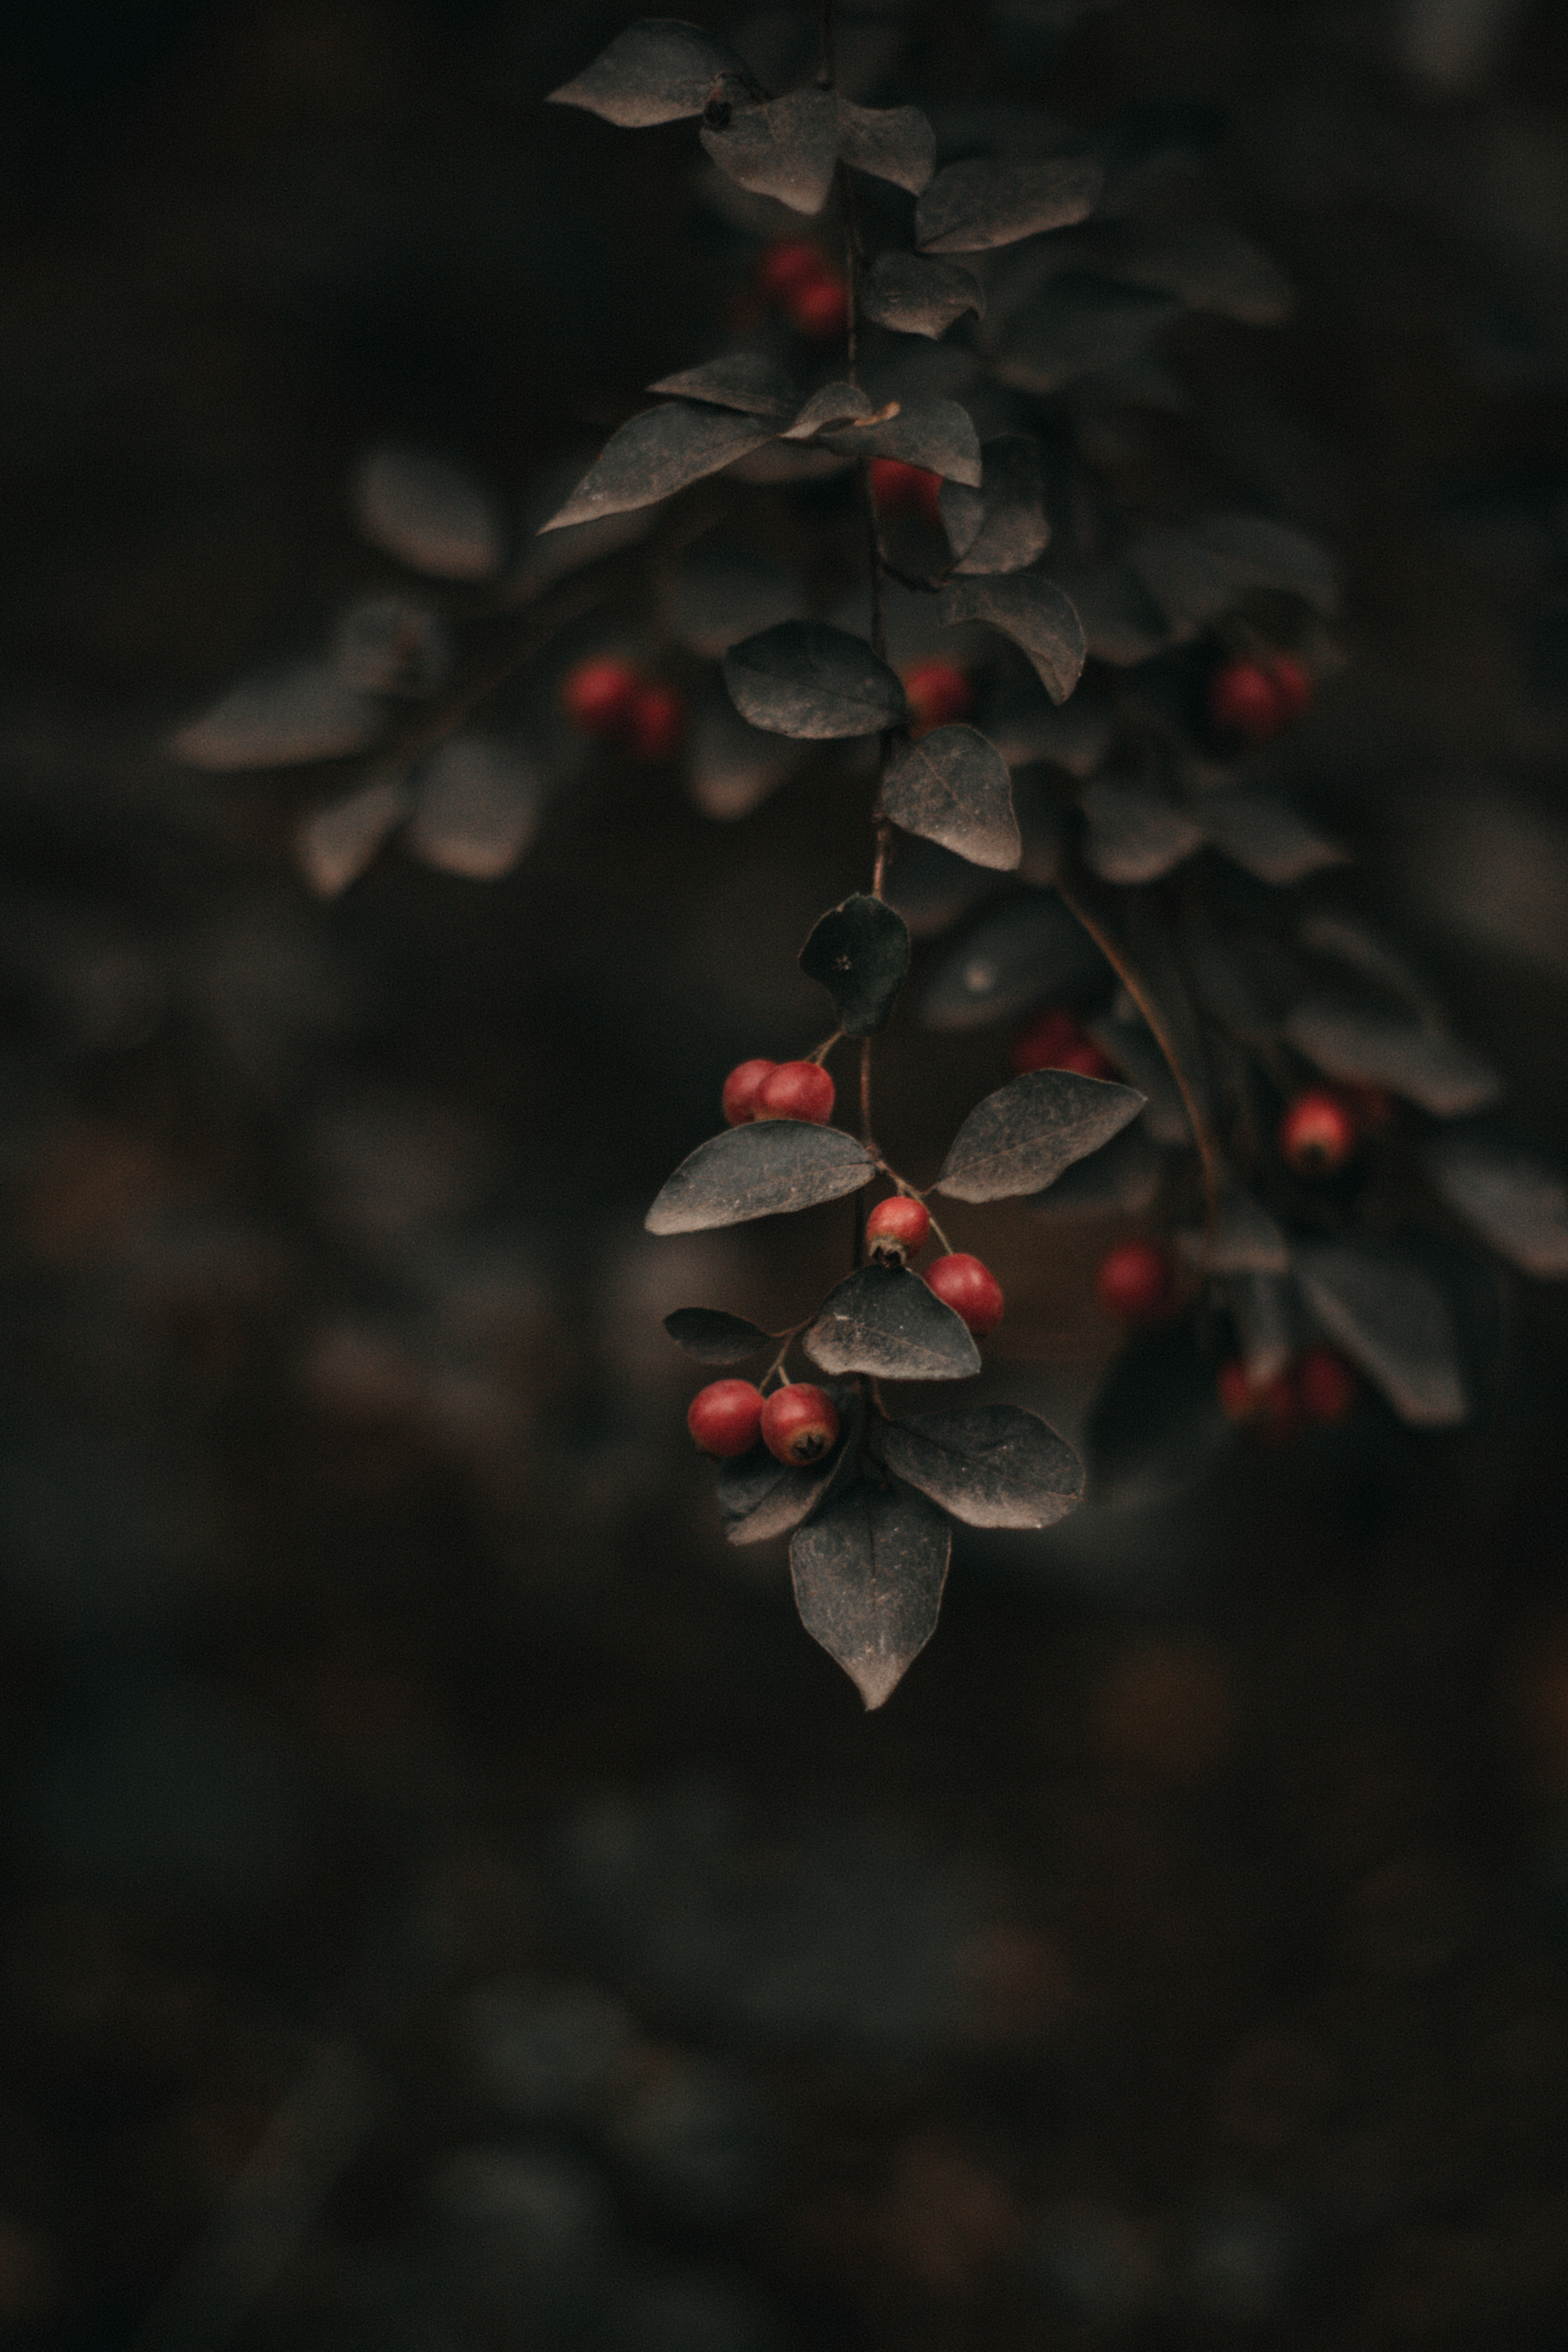 focus, nature, leaves, bush, branch, berry High Definition image